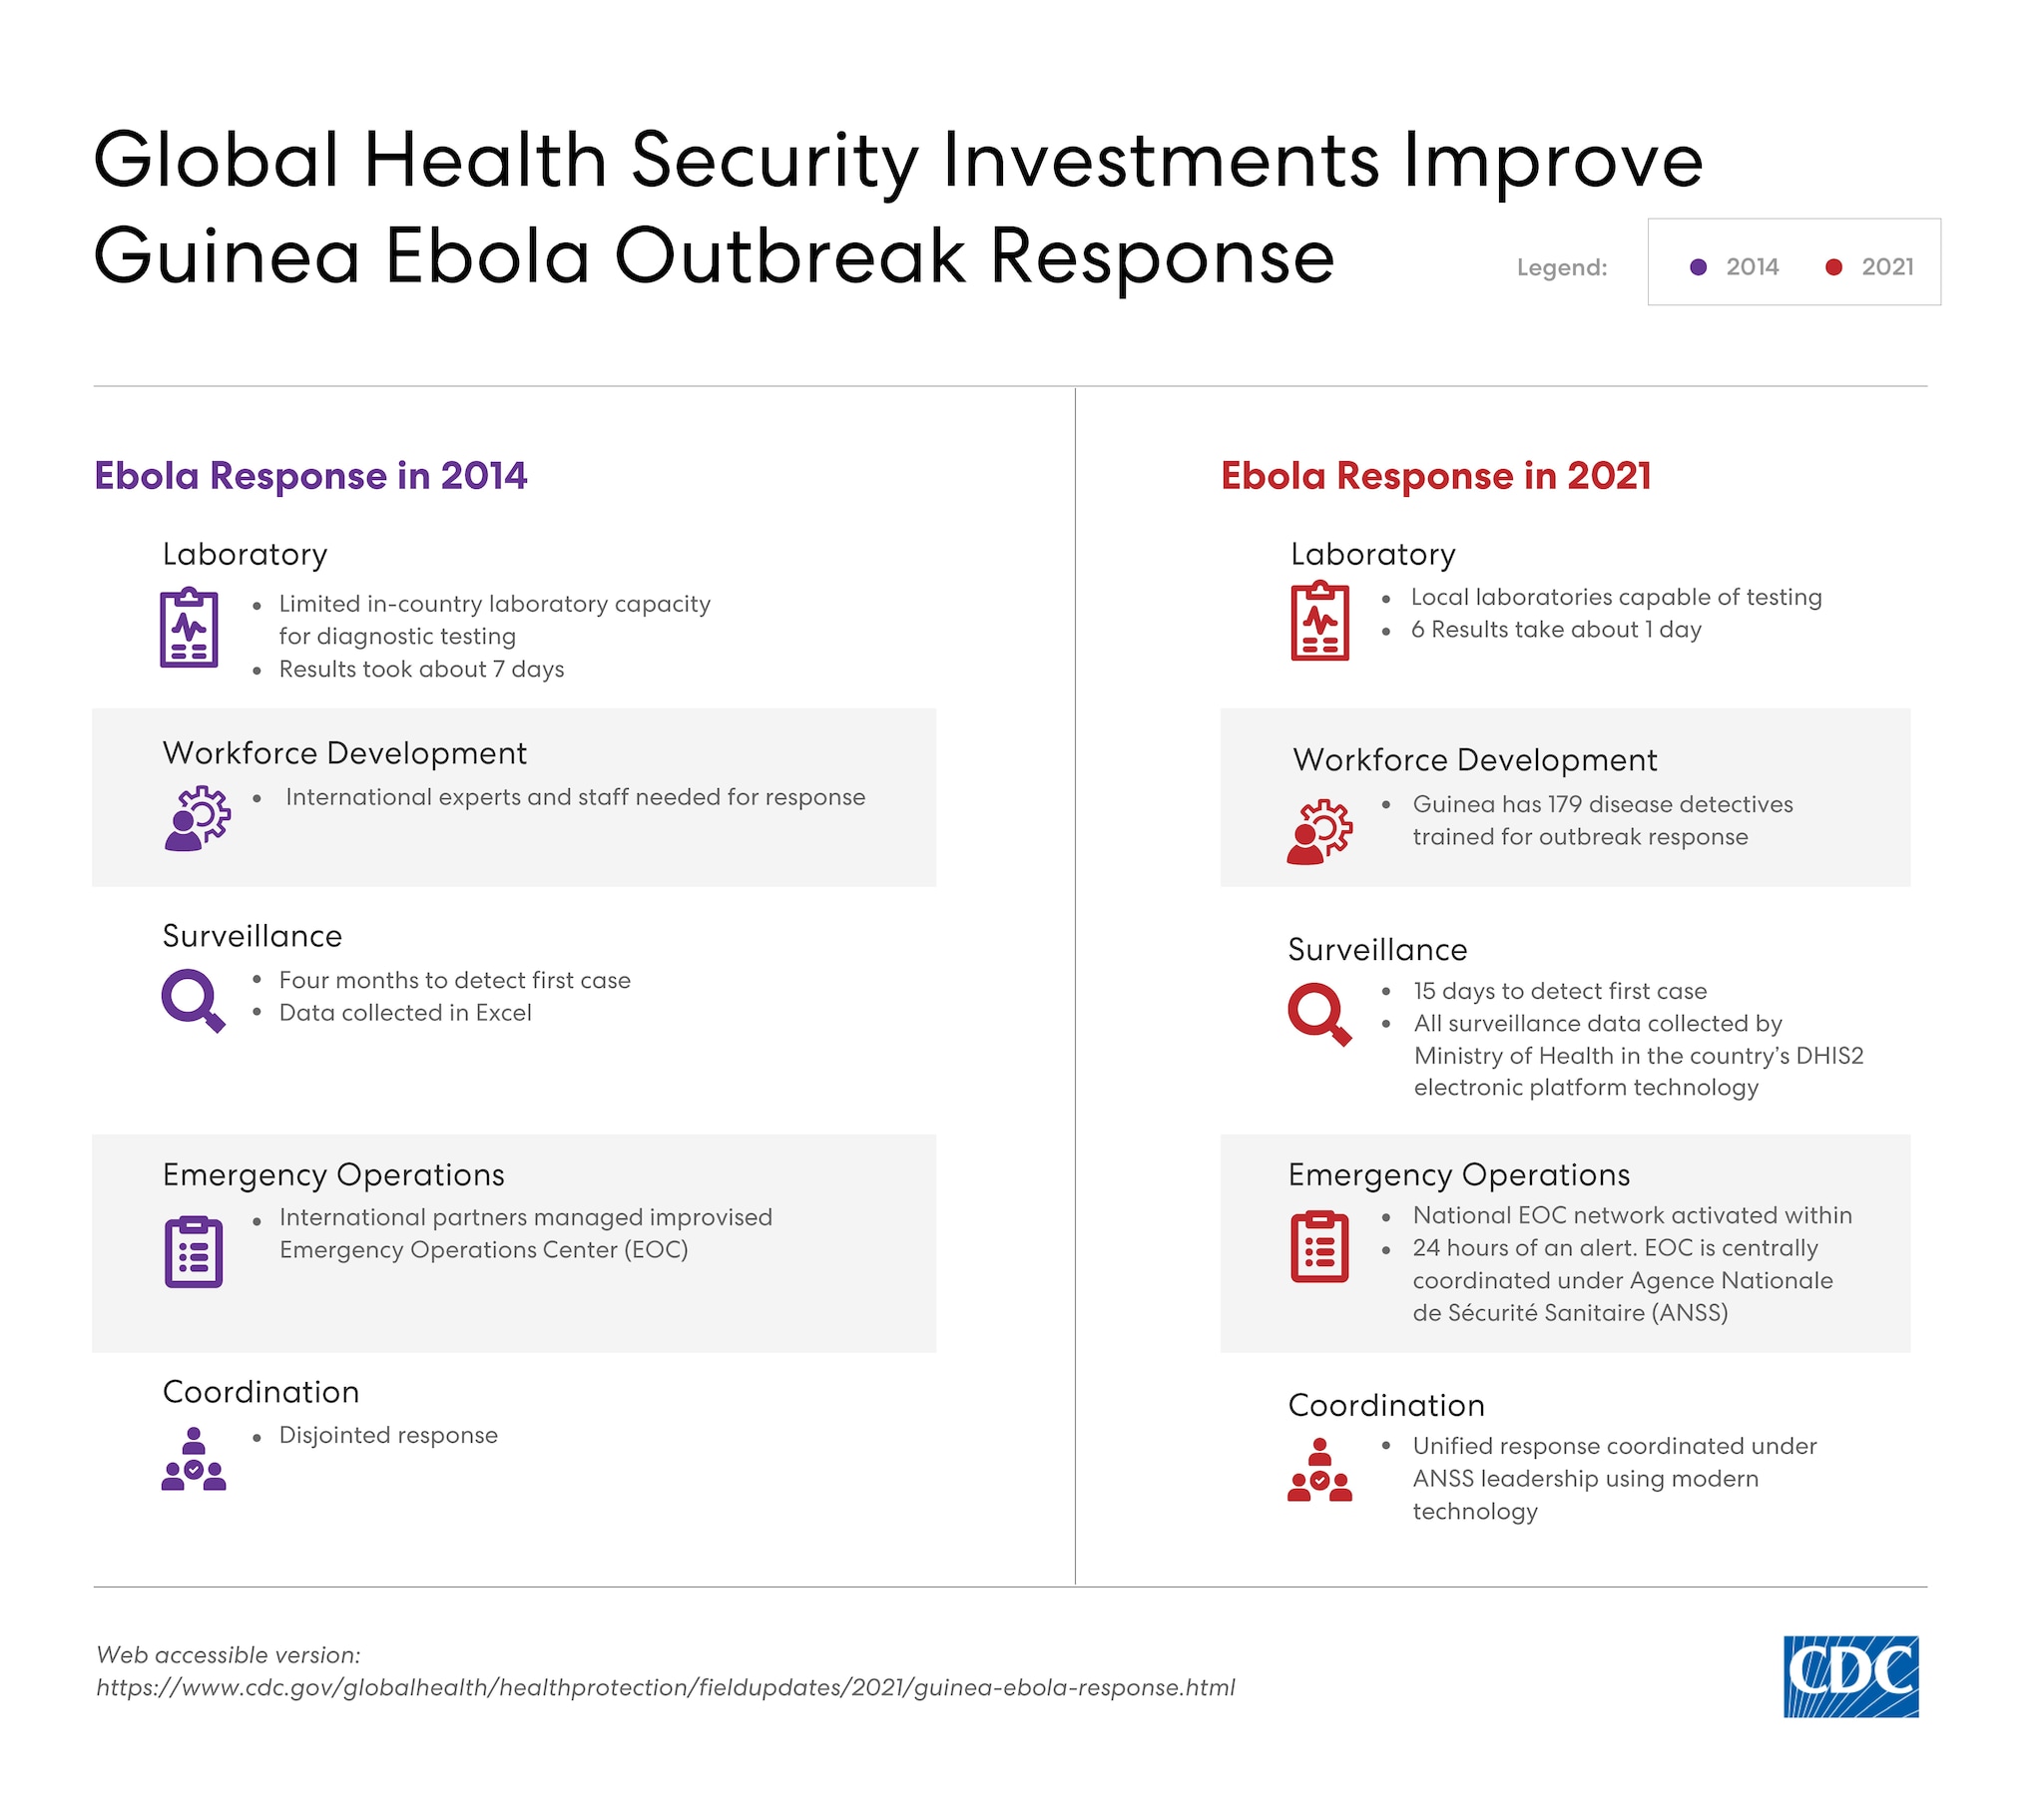 Global Health Security Investments Improve Guinea Ebola Outbreak Response 2014-2021.